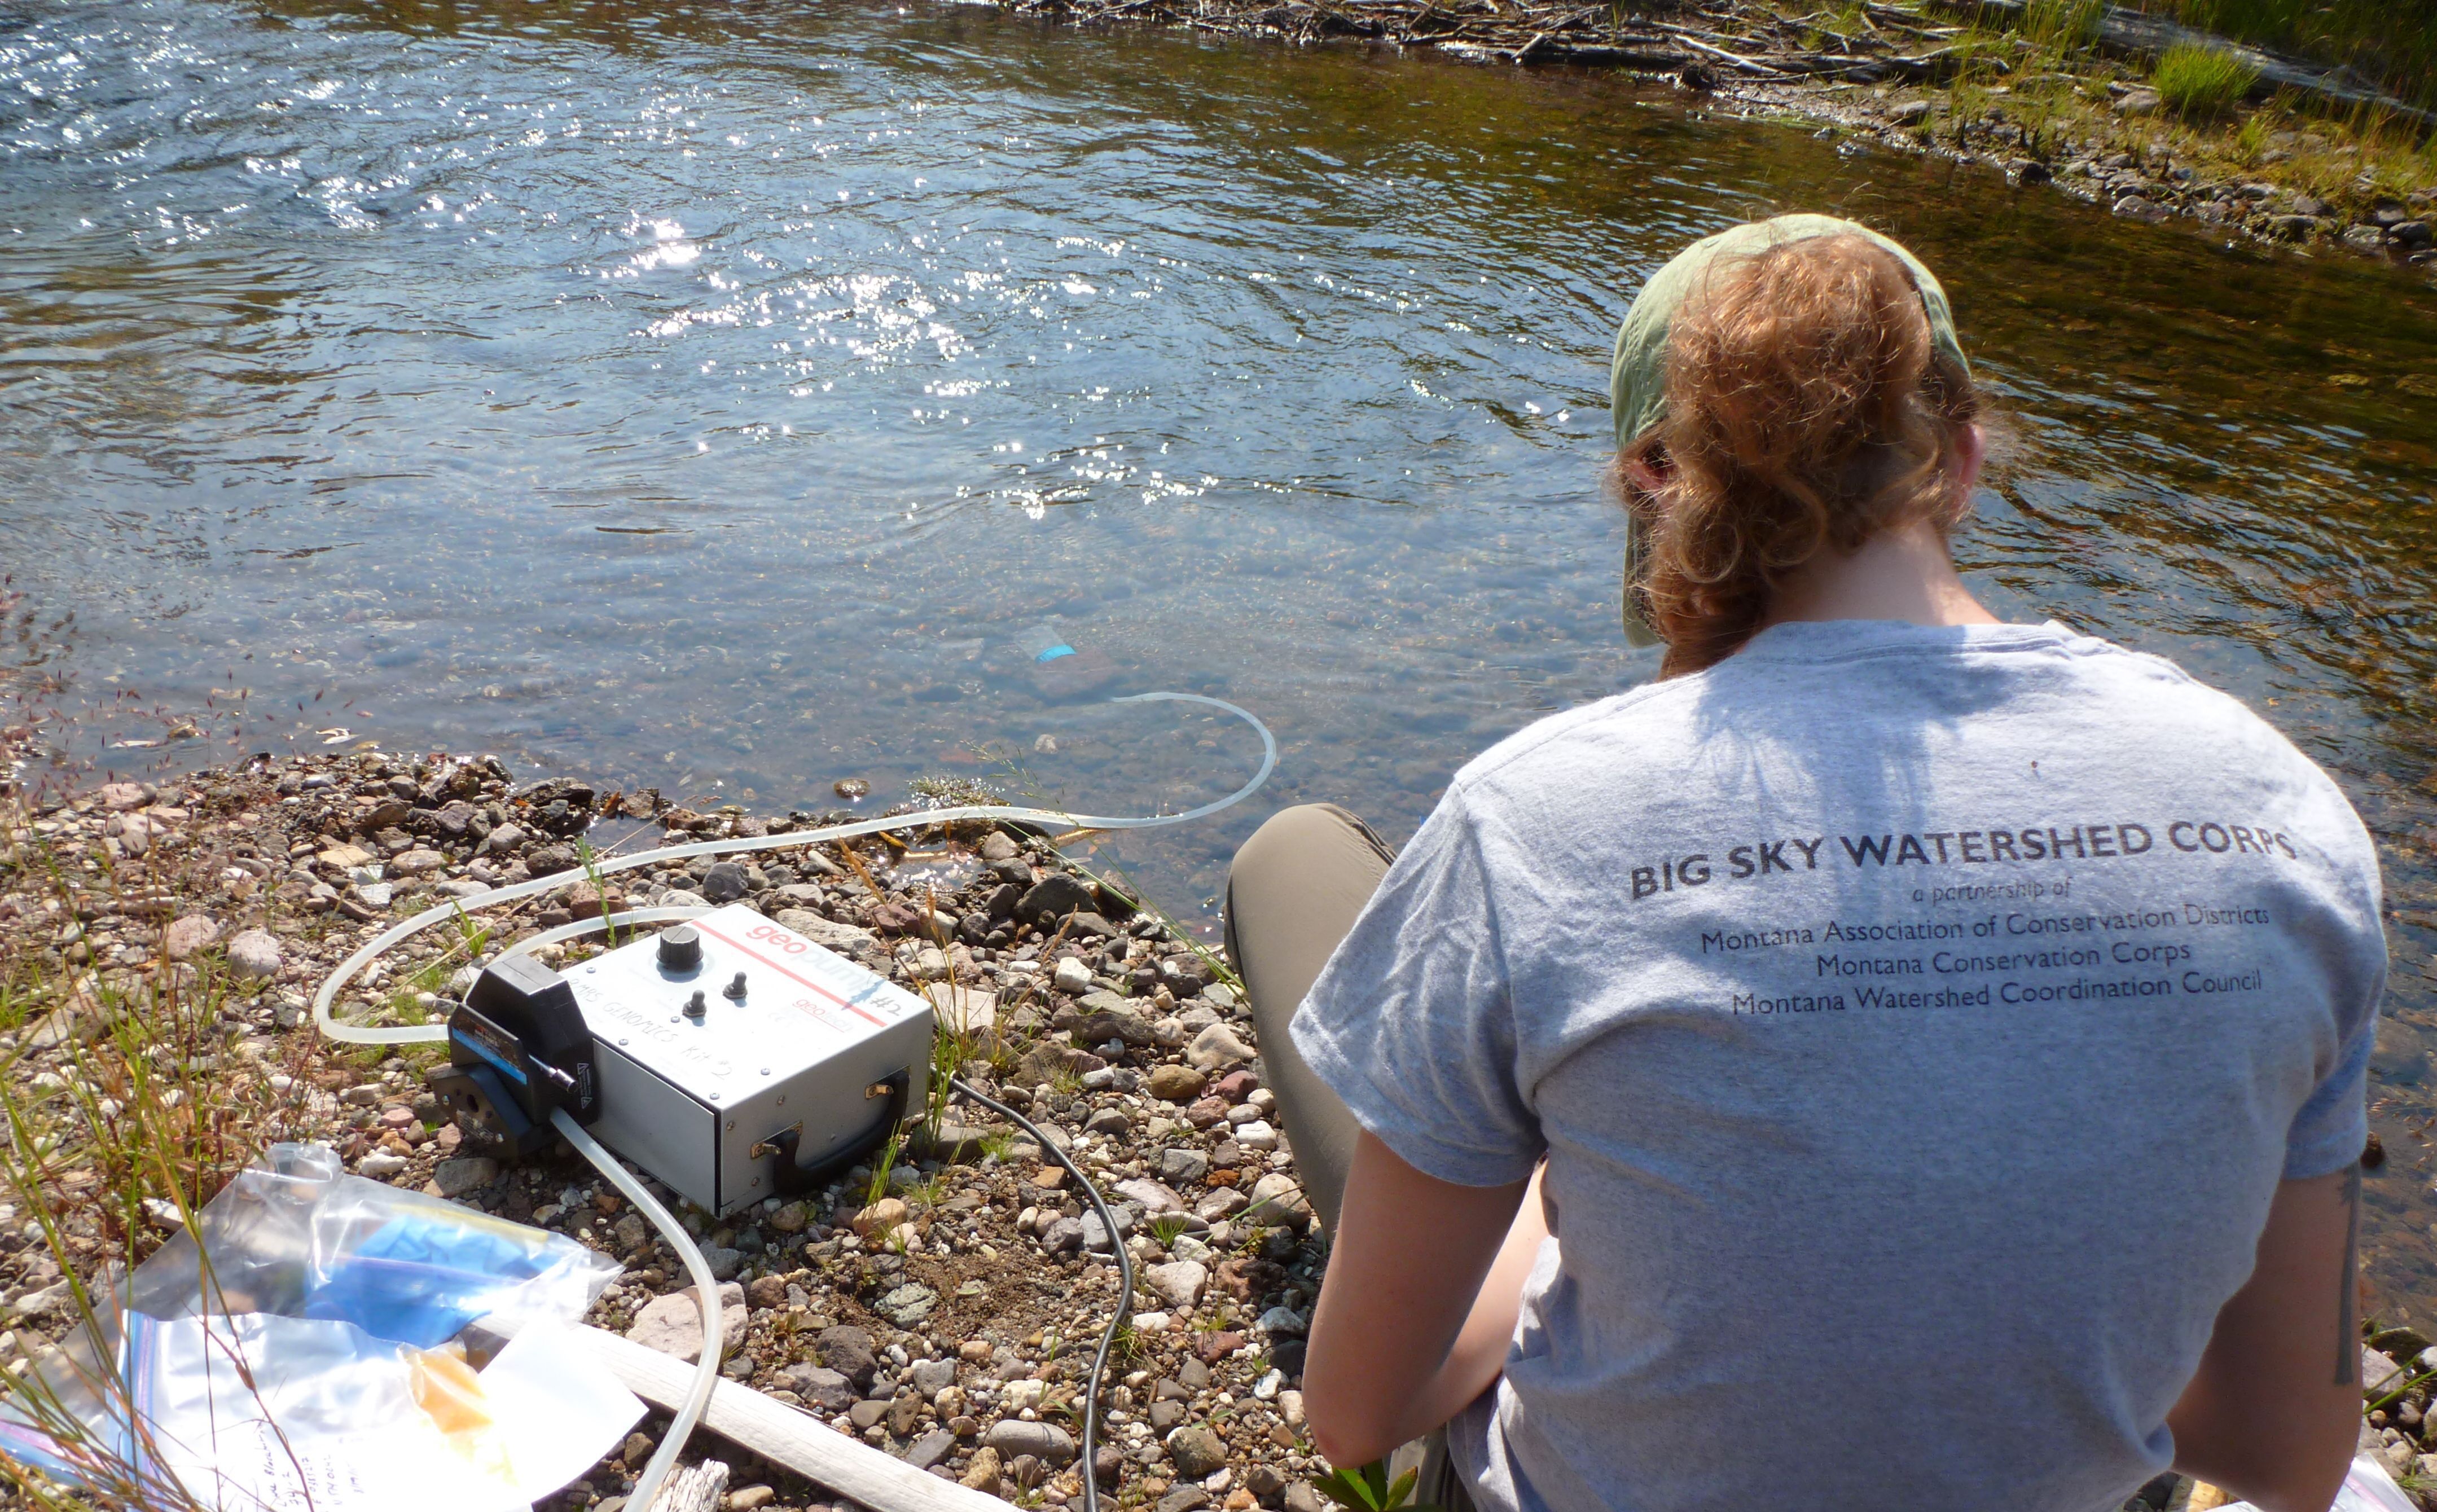 [Image Description: A Big Sky Watershed Corps member sits on a streambank, collecting samples of the water.]